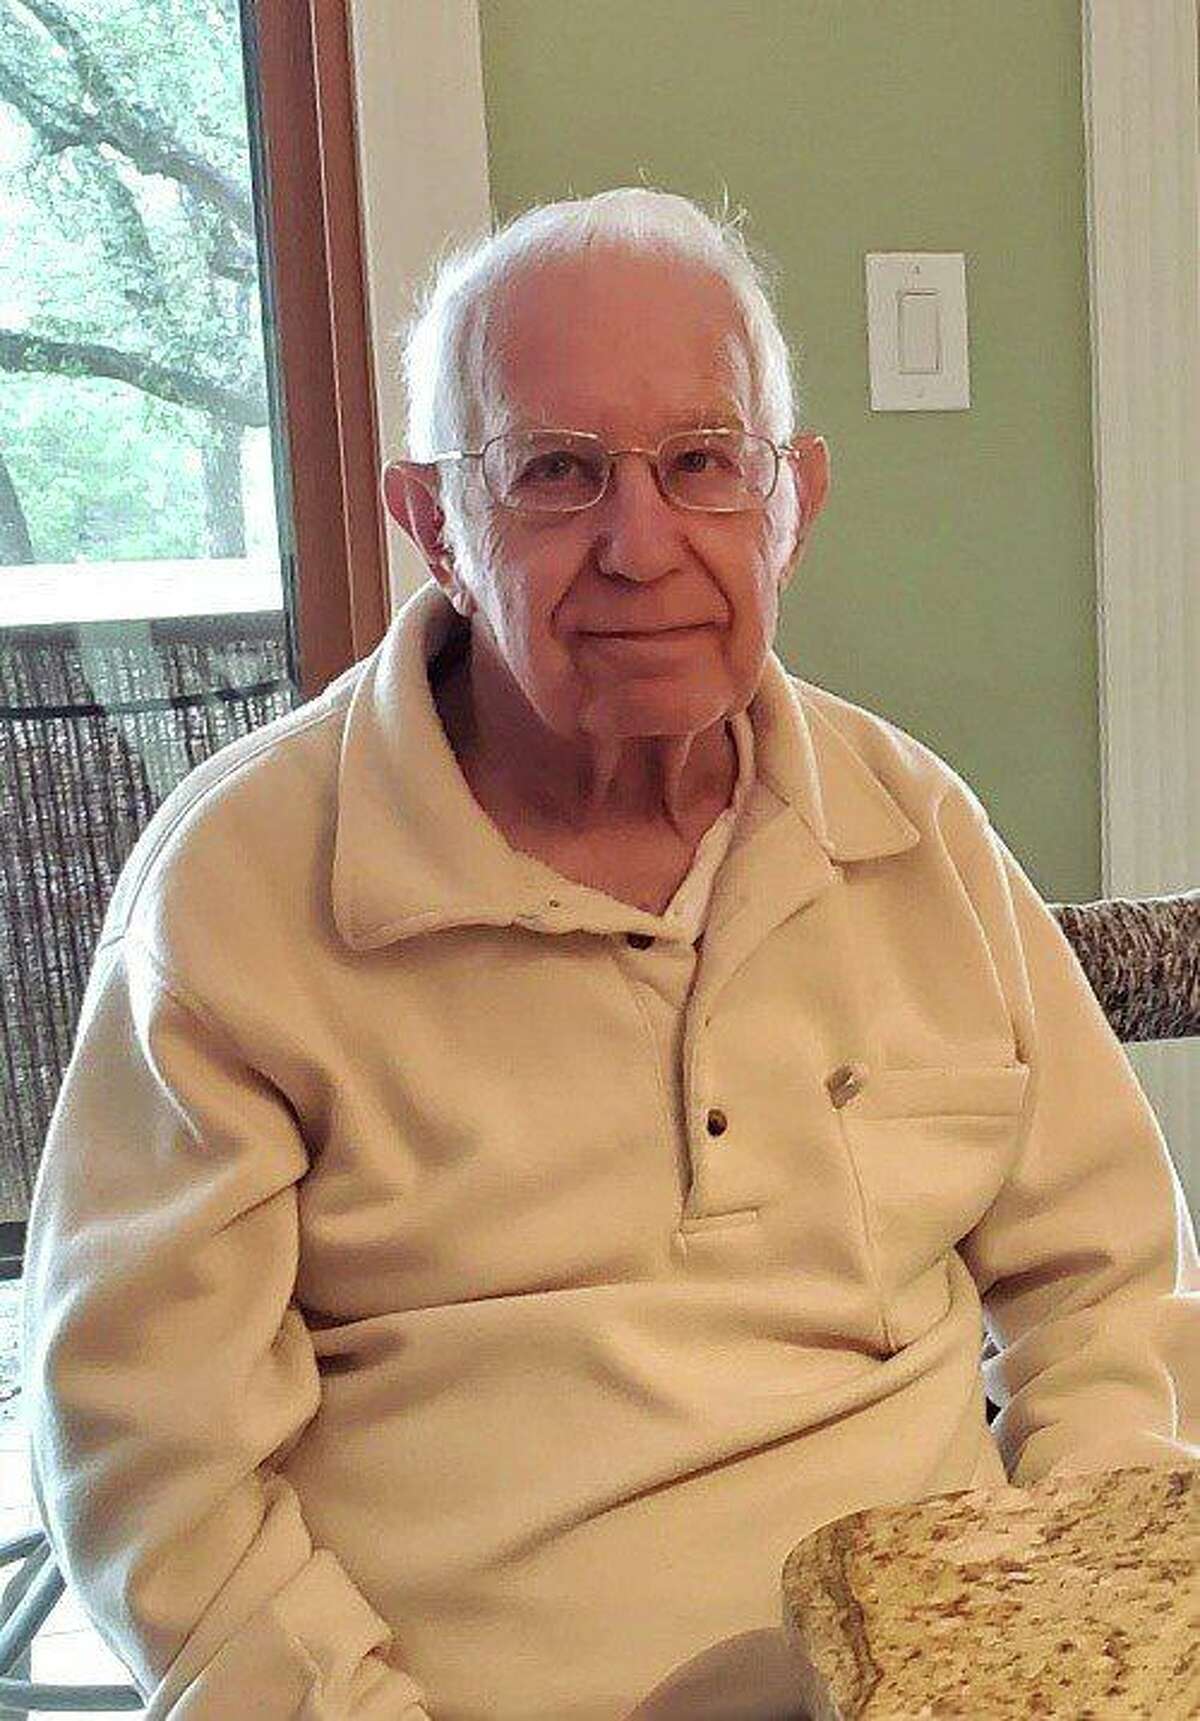 The Bexar County Sheriff’s Office is asking for your help finding Jack Kirk Wells, 89, who was last seen Friday in the 3000 block of Grosenbacher on the far West Side.